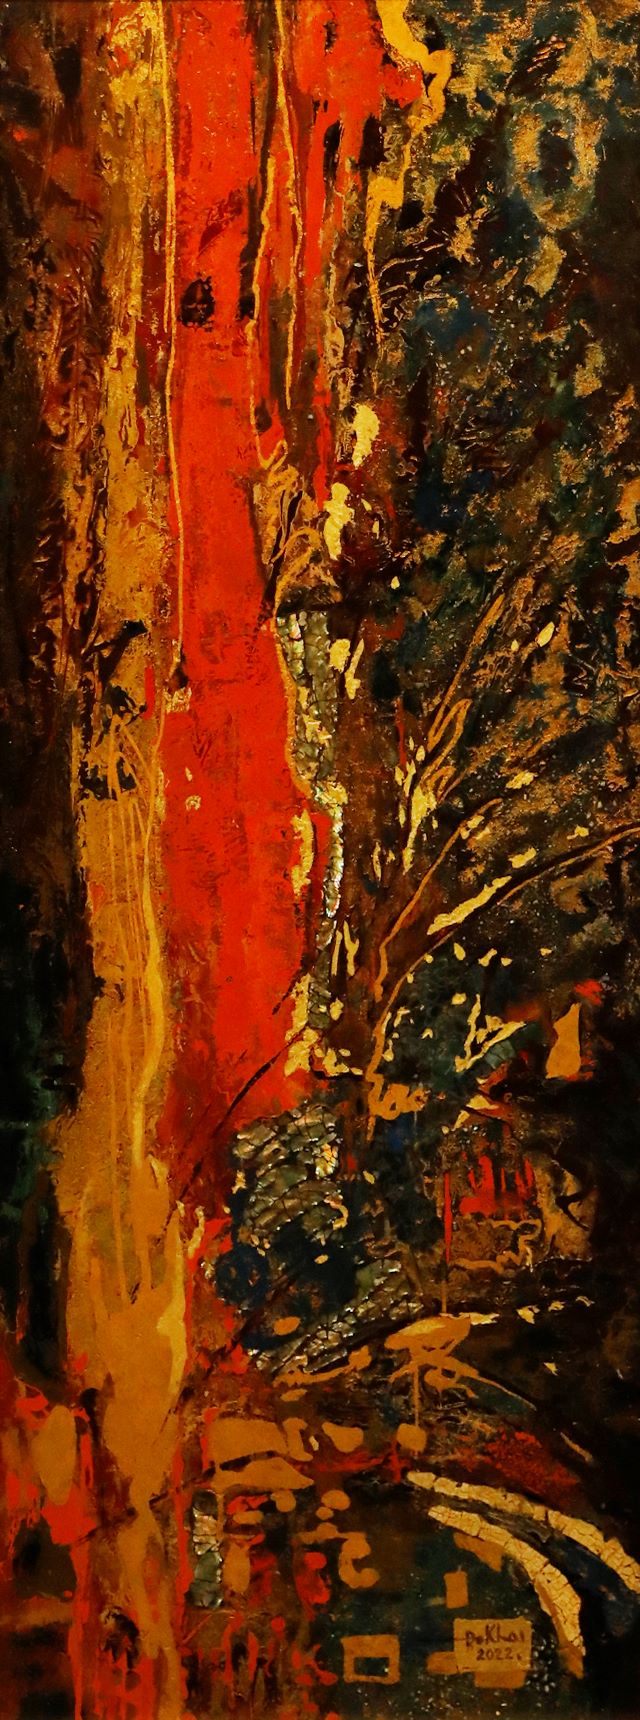 Abstract I - Vietnamese Lacquer Painting by Artist Do Khai